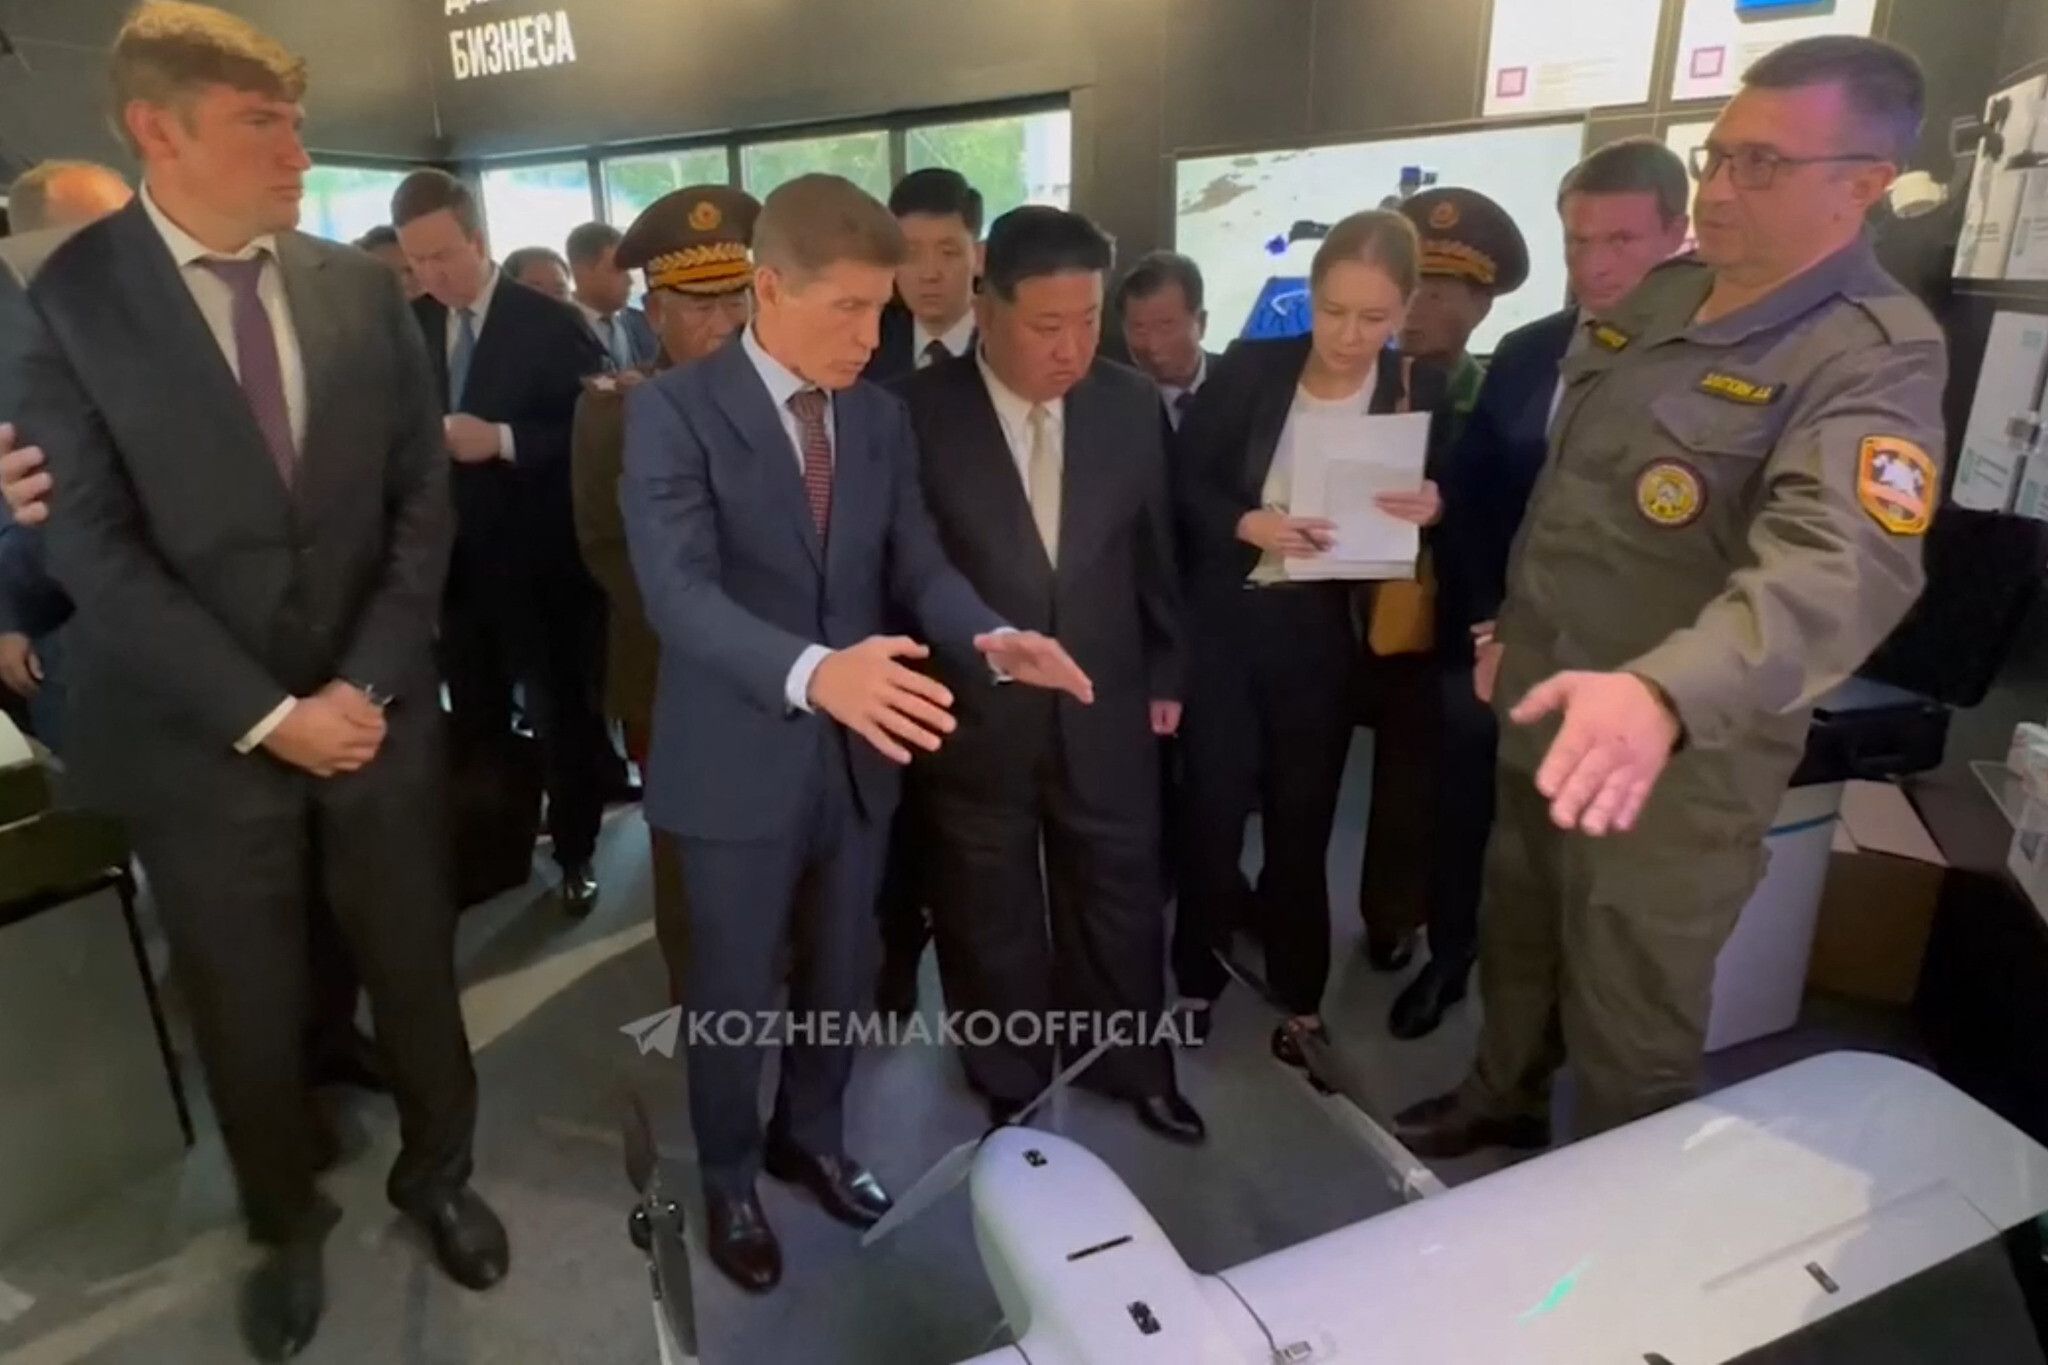 Kim Jong Un returns to North Korea with gifts from Russia: Rifle, fur hat,  drones